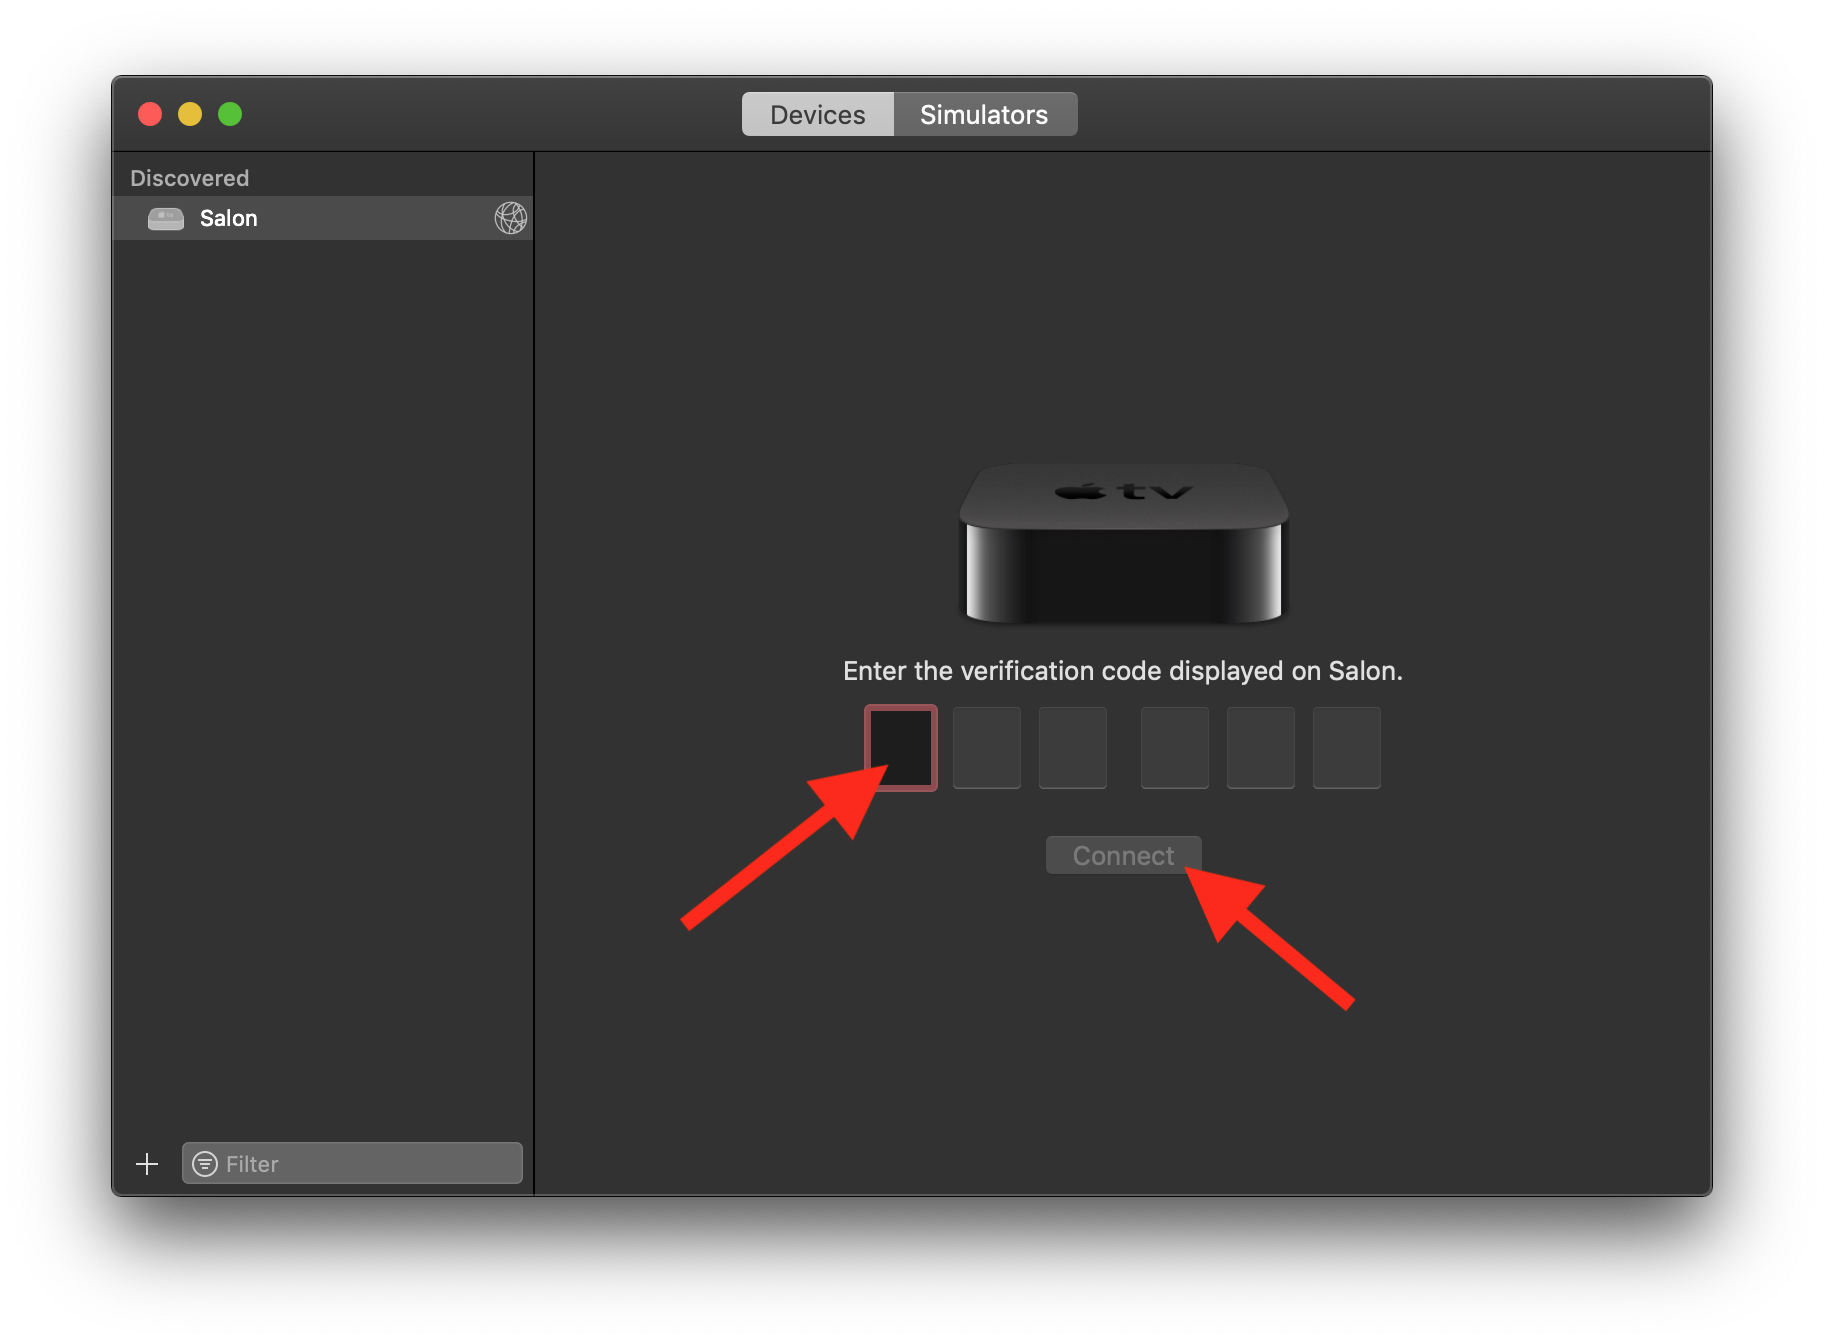 Step 7: Fill the verification code that appear on your Apple TV screen and click on "Connect". Your device is now paired with Xcode!